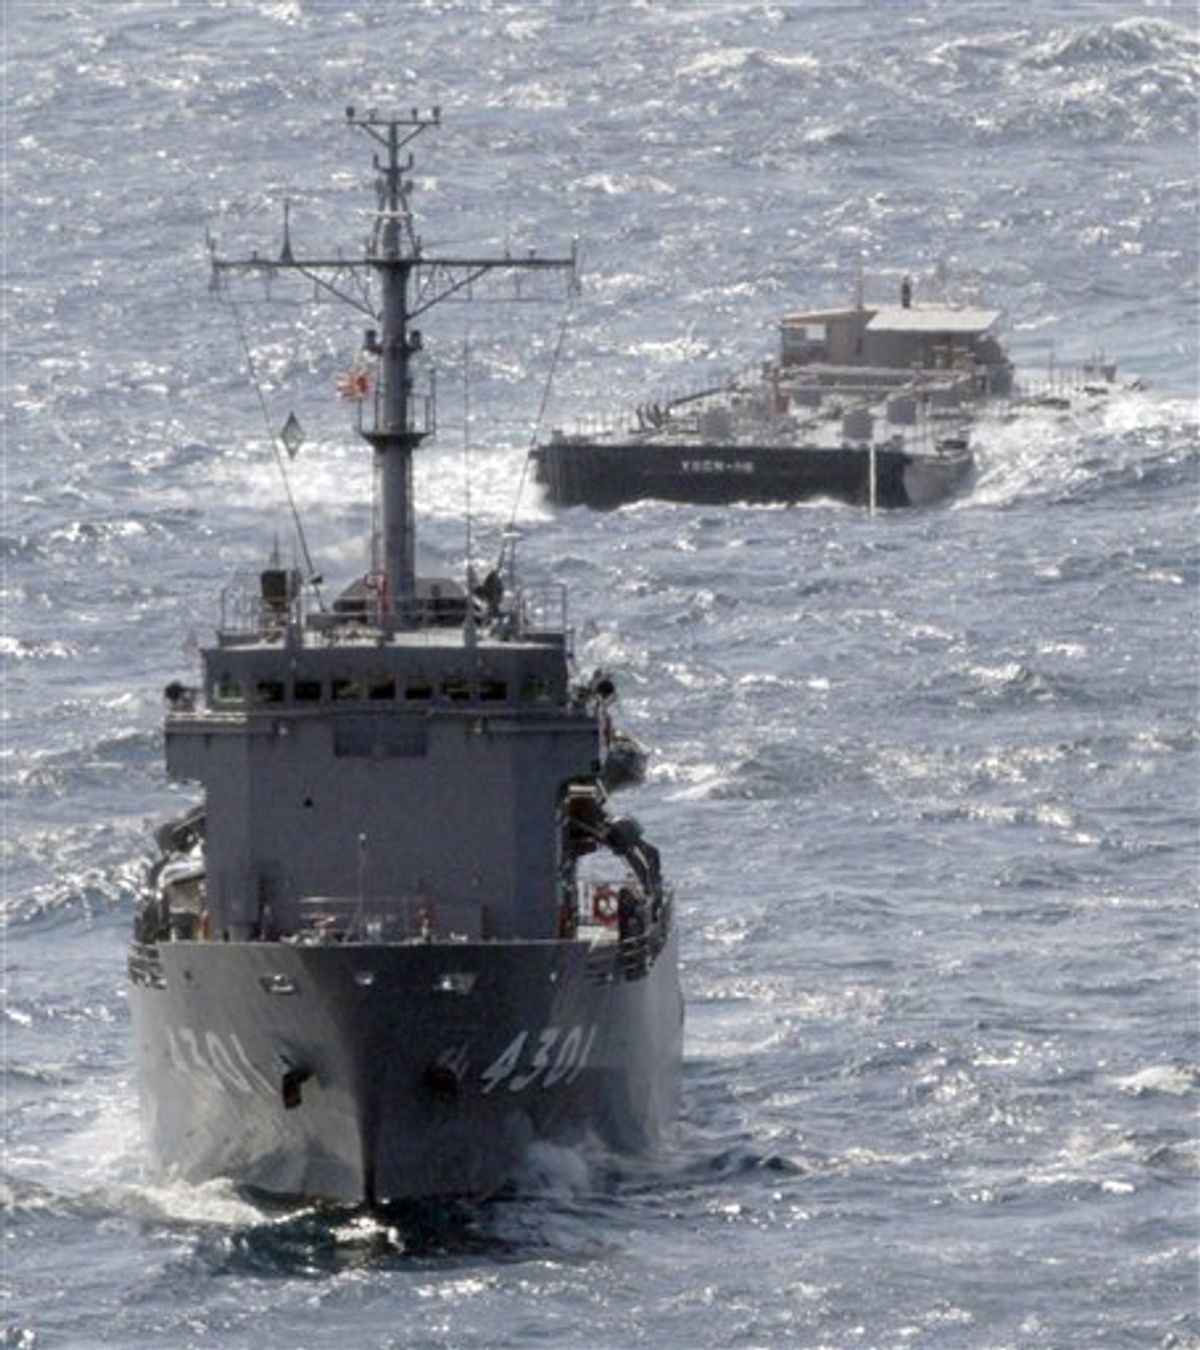 U.S. Navy's barge YOGN-115, back, is towed by Japan's Maritime Self-Defense Force's multi purpose support ship off the coast of Isumi, Chiba Prefecture, Japan, Saturday, March 26, 2011. The barge carrying 1.04 million liters (275,000 gallons) of fresh water departed Commander, Fleet Activities Yokosuka (CFAY) Friday to support cooling efforts at the tsunami-damaged Fukushima Dai-ichi nuclear power plant. (AP Photo/Yomiuri Shimbun, Yasushi Kanno) JAPAN OUT, MANDATORY CREDIT (AP)